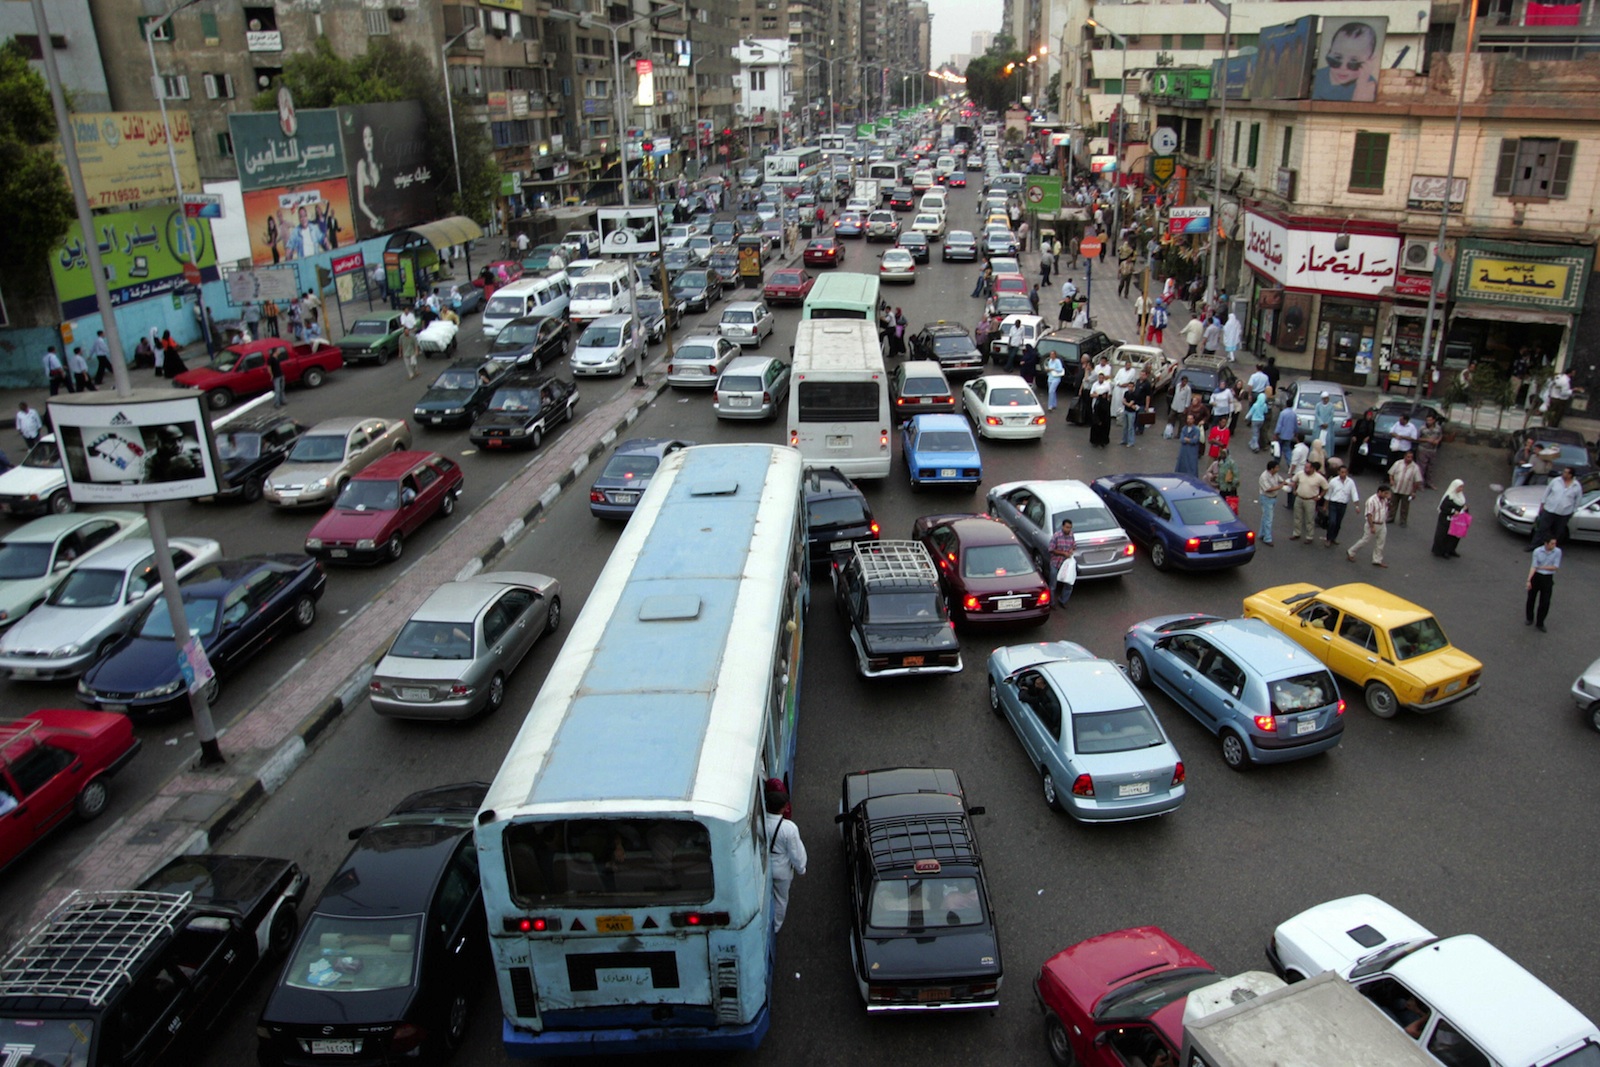 TO GO WITH AFP STORY: (FILES) A file picture dated 10 September 2007 shows cars stuck in a traffic jam in Cairo a few days before the start of the school year and beginning of the holy month of Ramadan. A permanent cacophony in Cairo, already suffering from a record high air pollution, makes the Egyptian capital one of the world's most unbearably noisy cities, according to scientific studies. AFP PHOTO/KHALED DESOUKI (Photo credit should read KHALED DESOUKI/AFP/Getty Images)